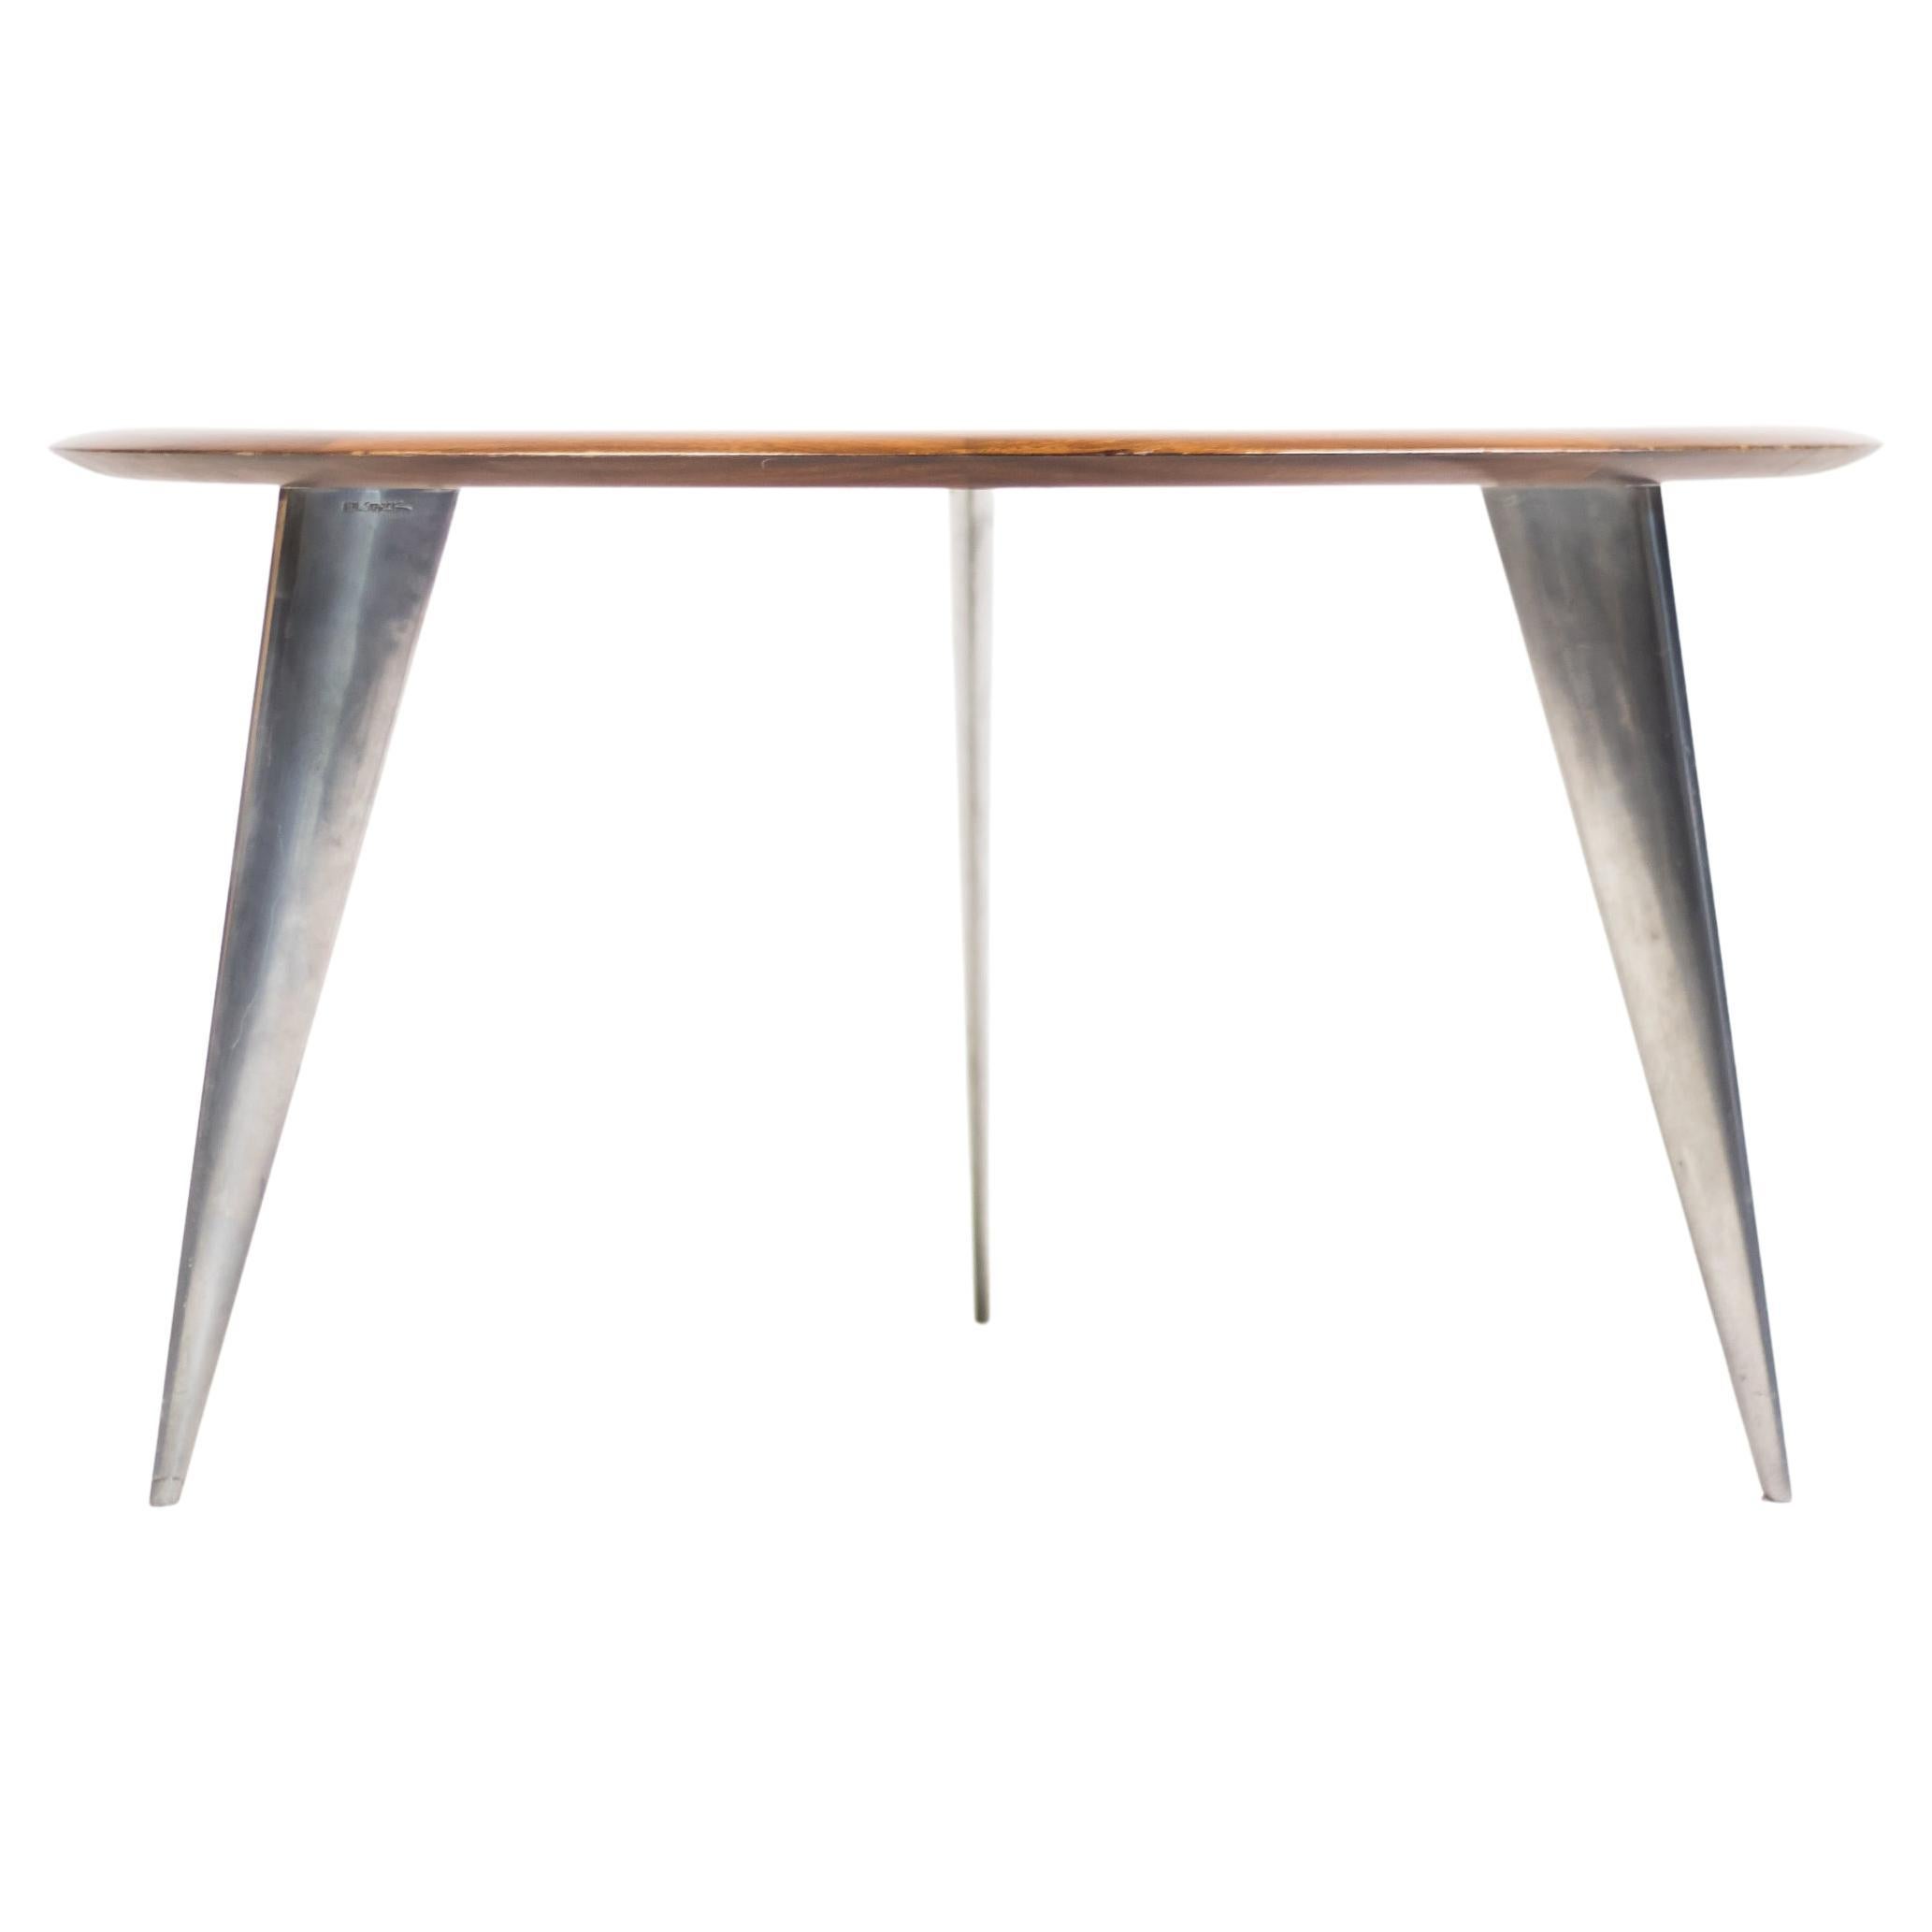 Philippe Starck "Flying Saucer" Dining Table